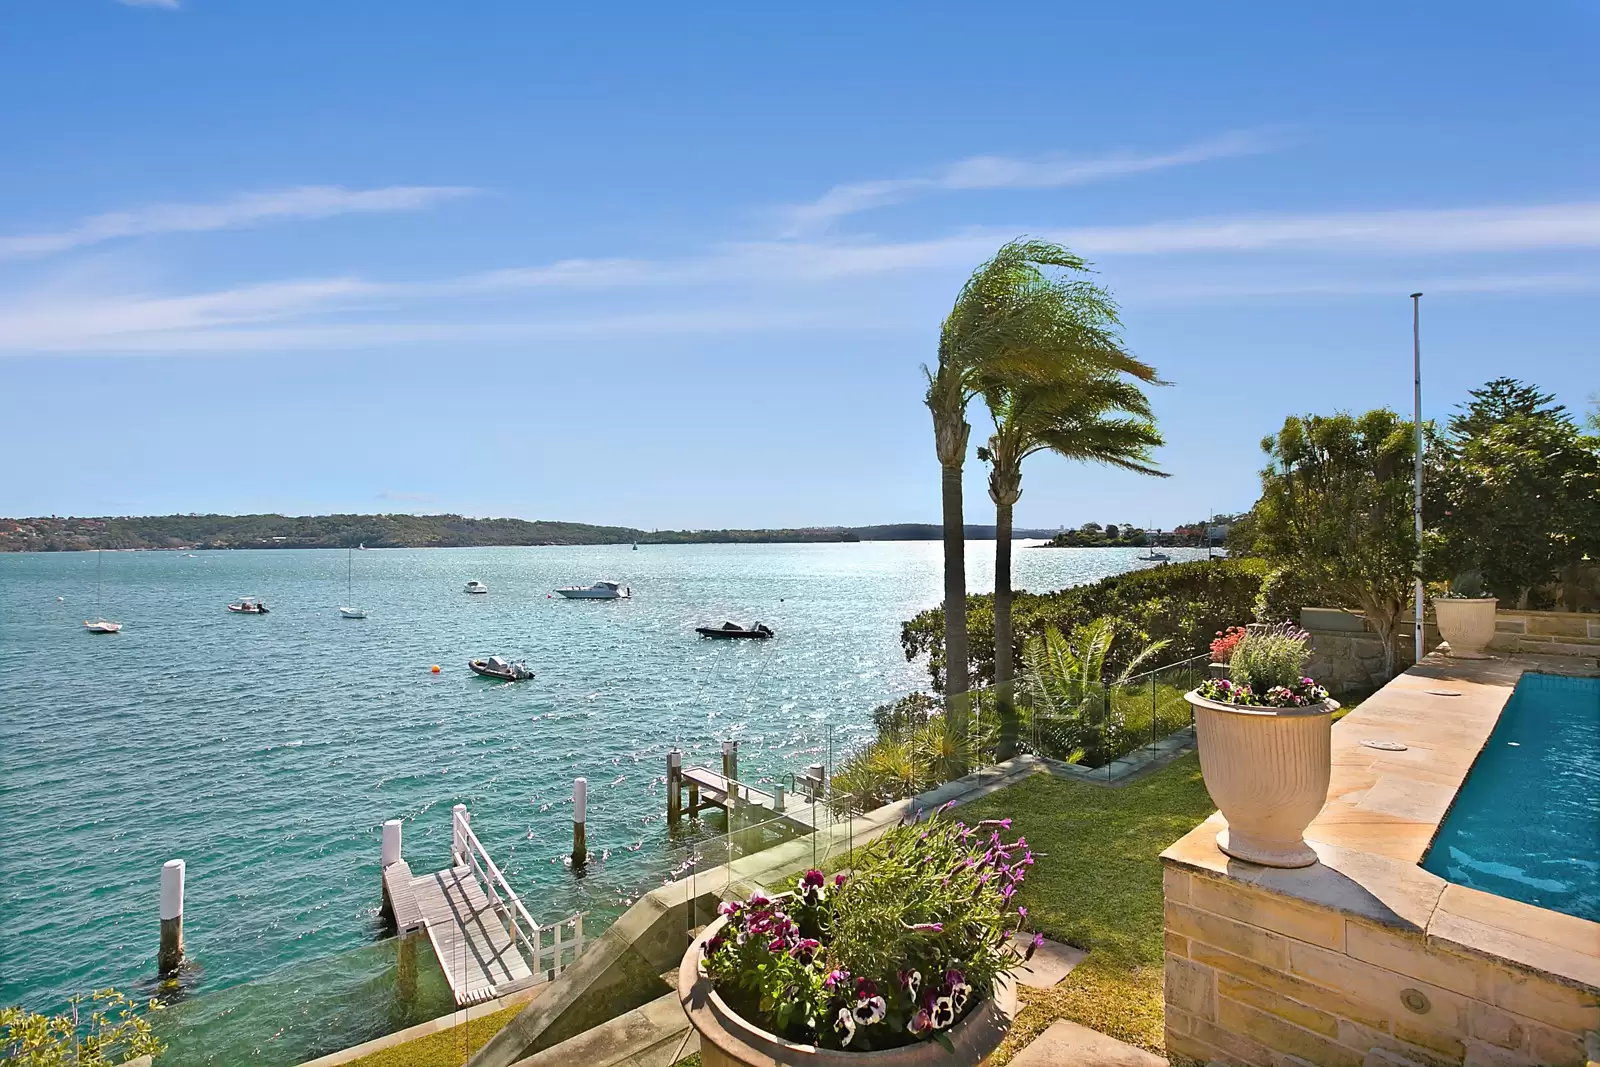 Photo #12: 34 The Crescent, Vaucluse - Sold by Sydney Sotheby's International Realty